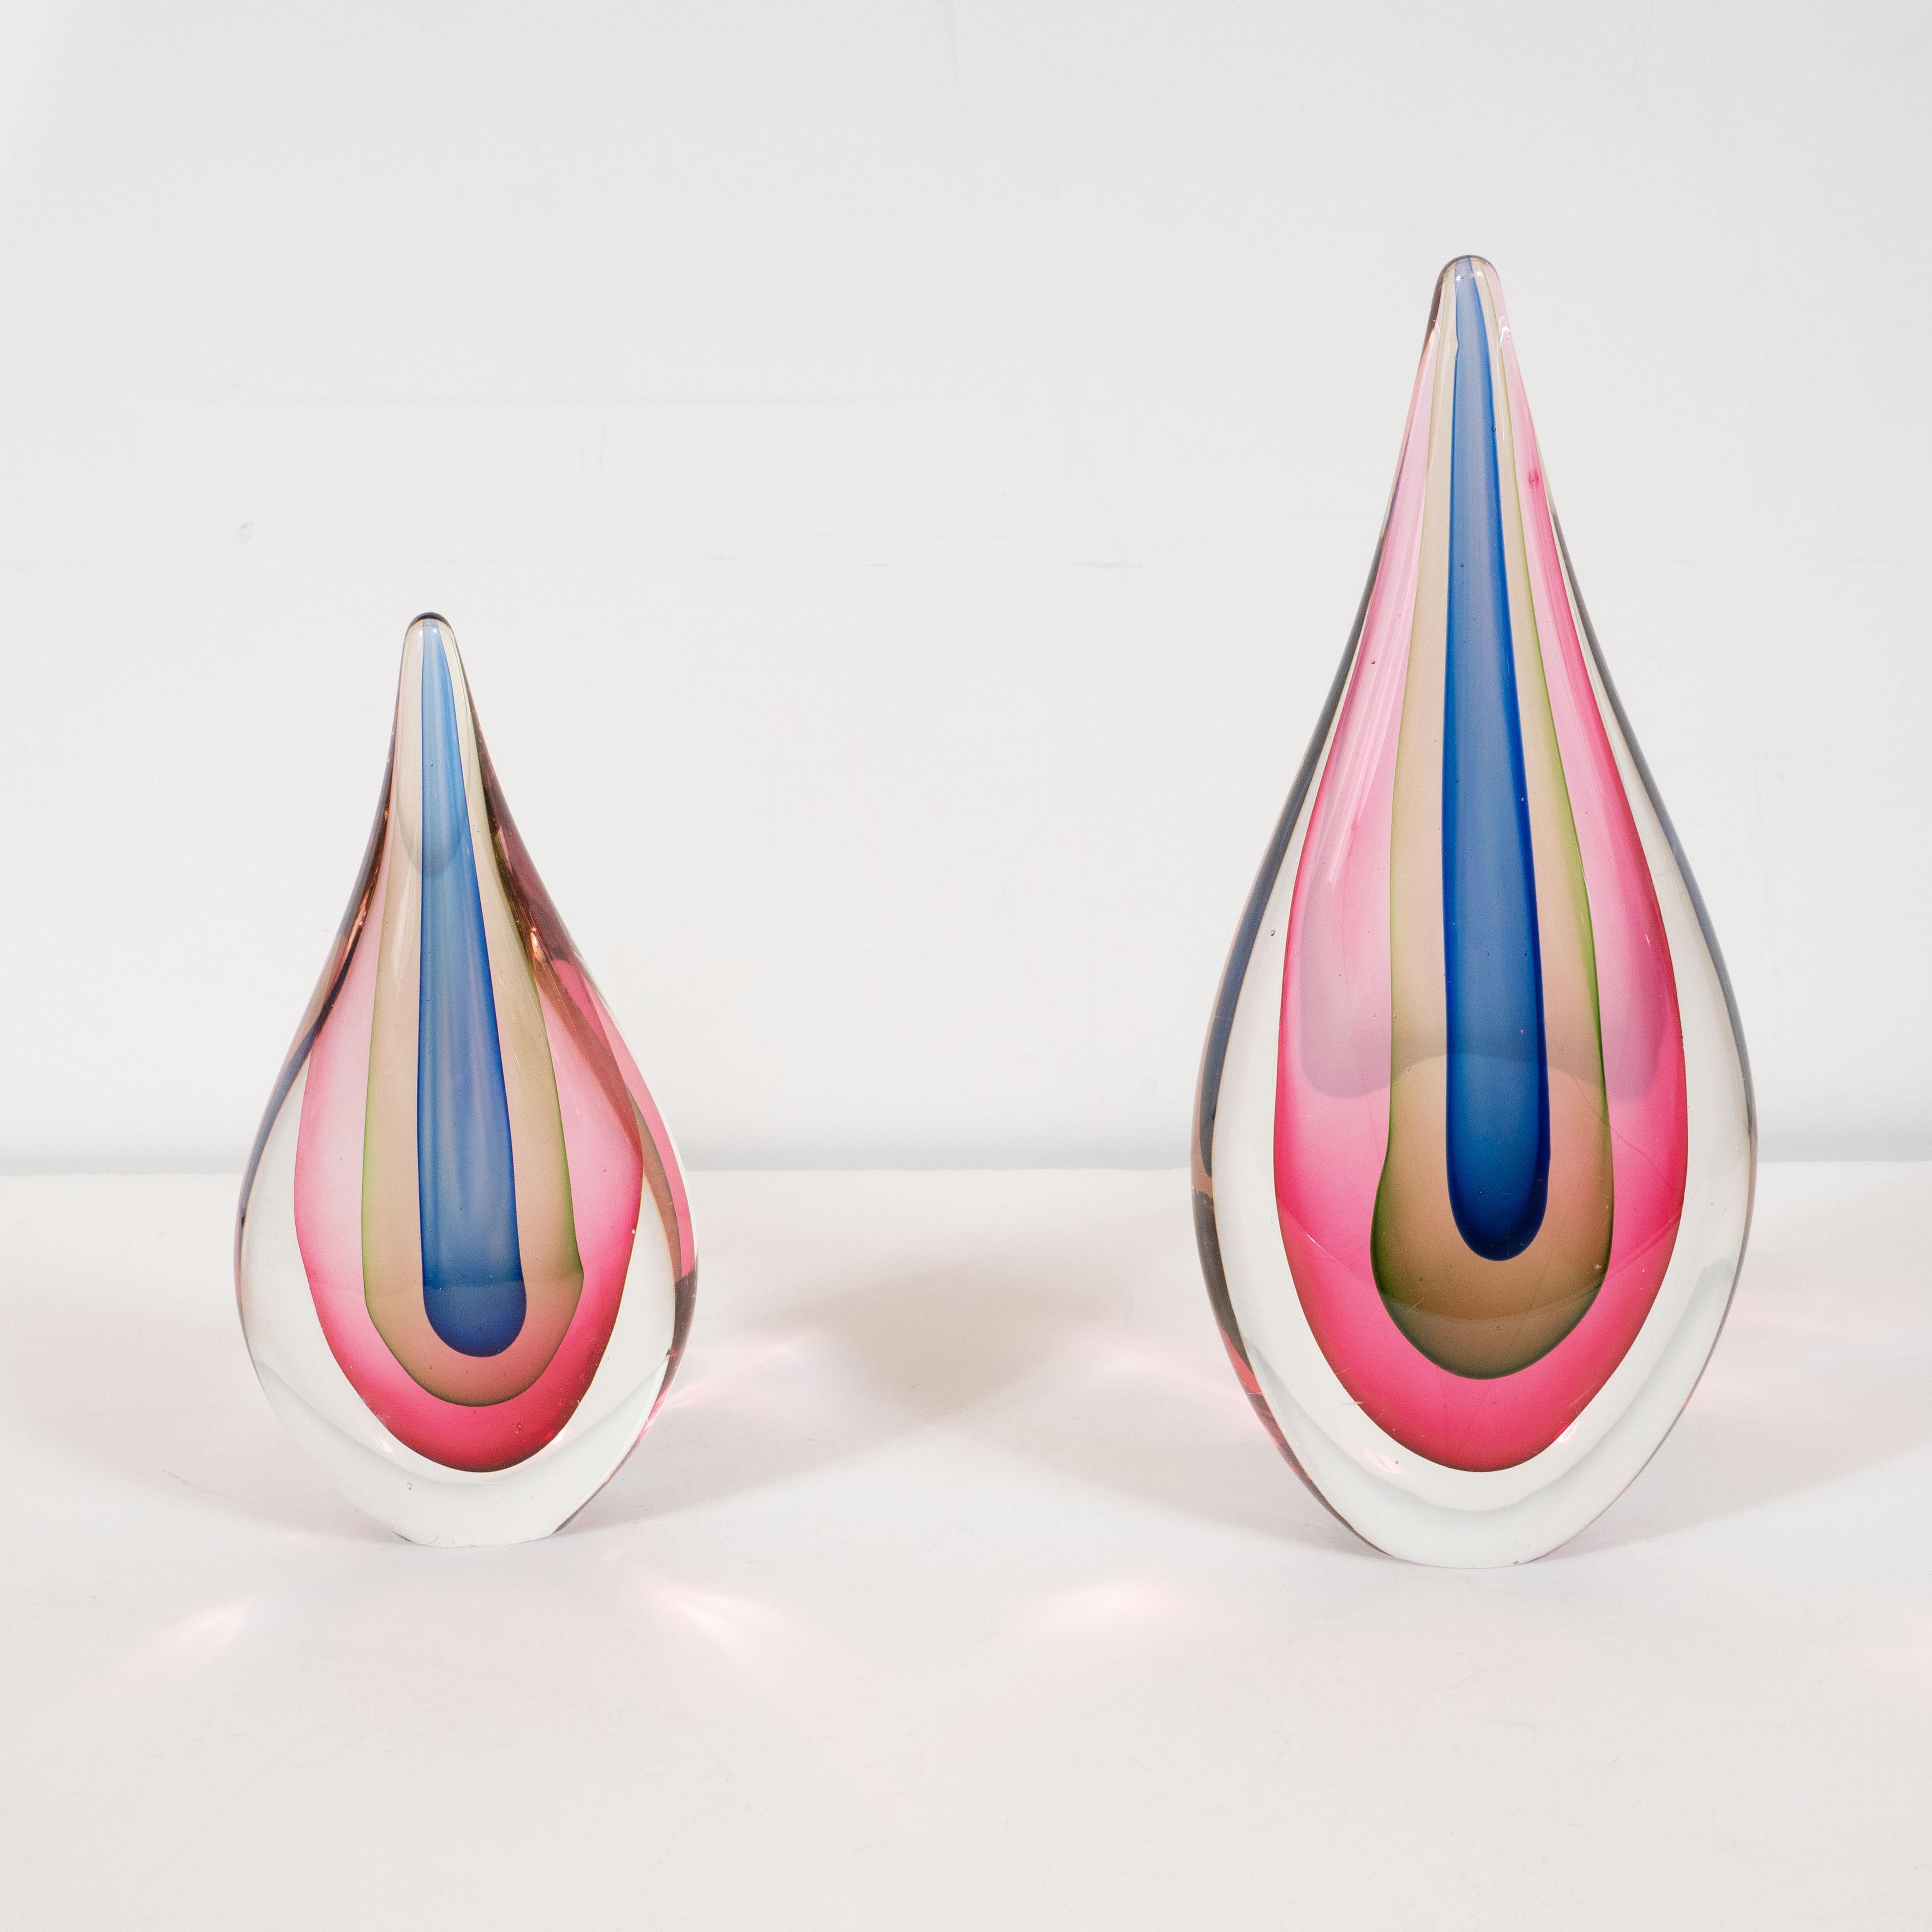 This stunning pair of objet d'art was hand blown in Murano, Italy- the island off the coast of Venice renowned for centuries for its superlative glass production, circa 1960. Composed of tear drop forms, these Sommerso glass objet d'art feature